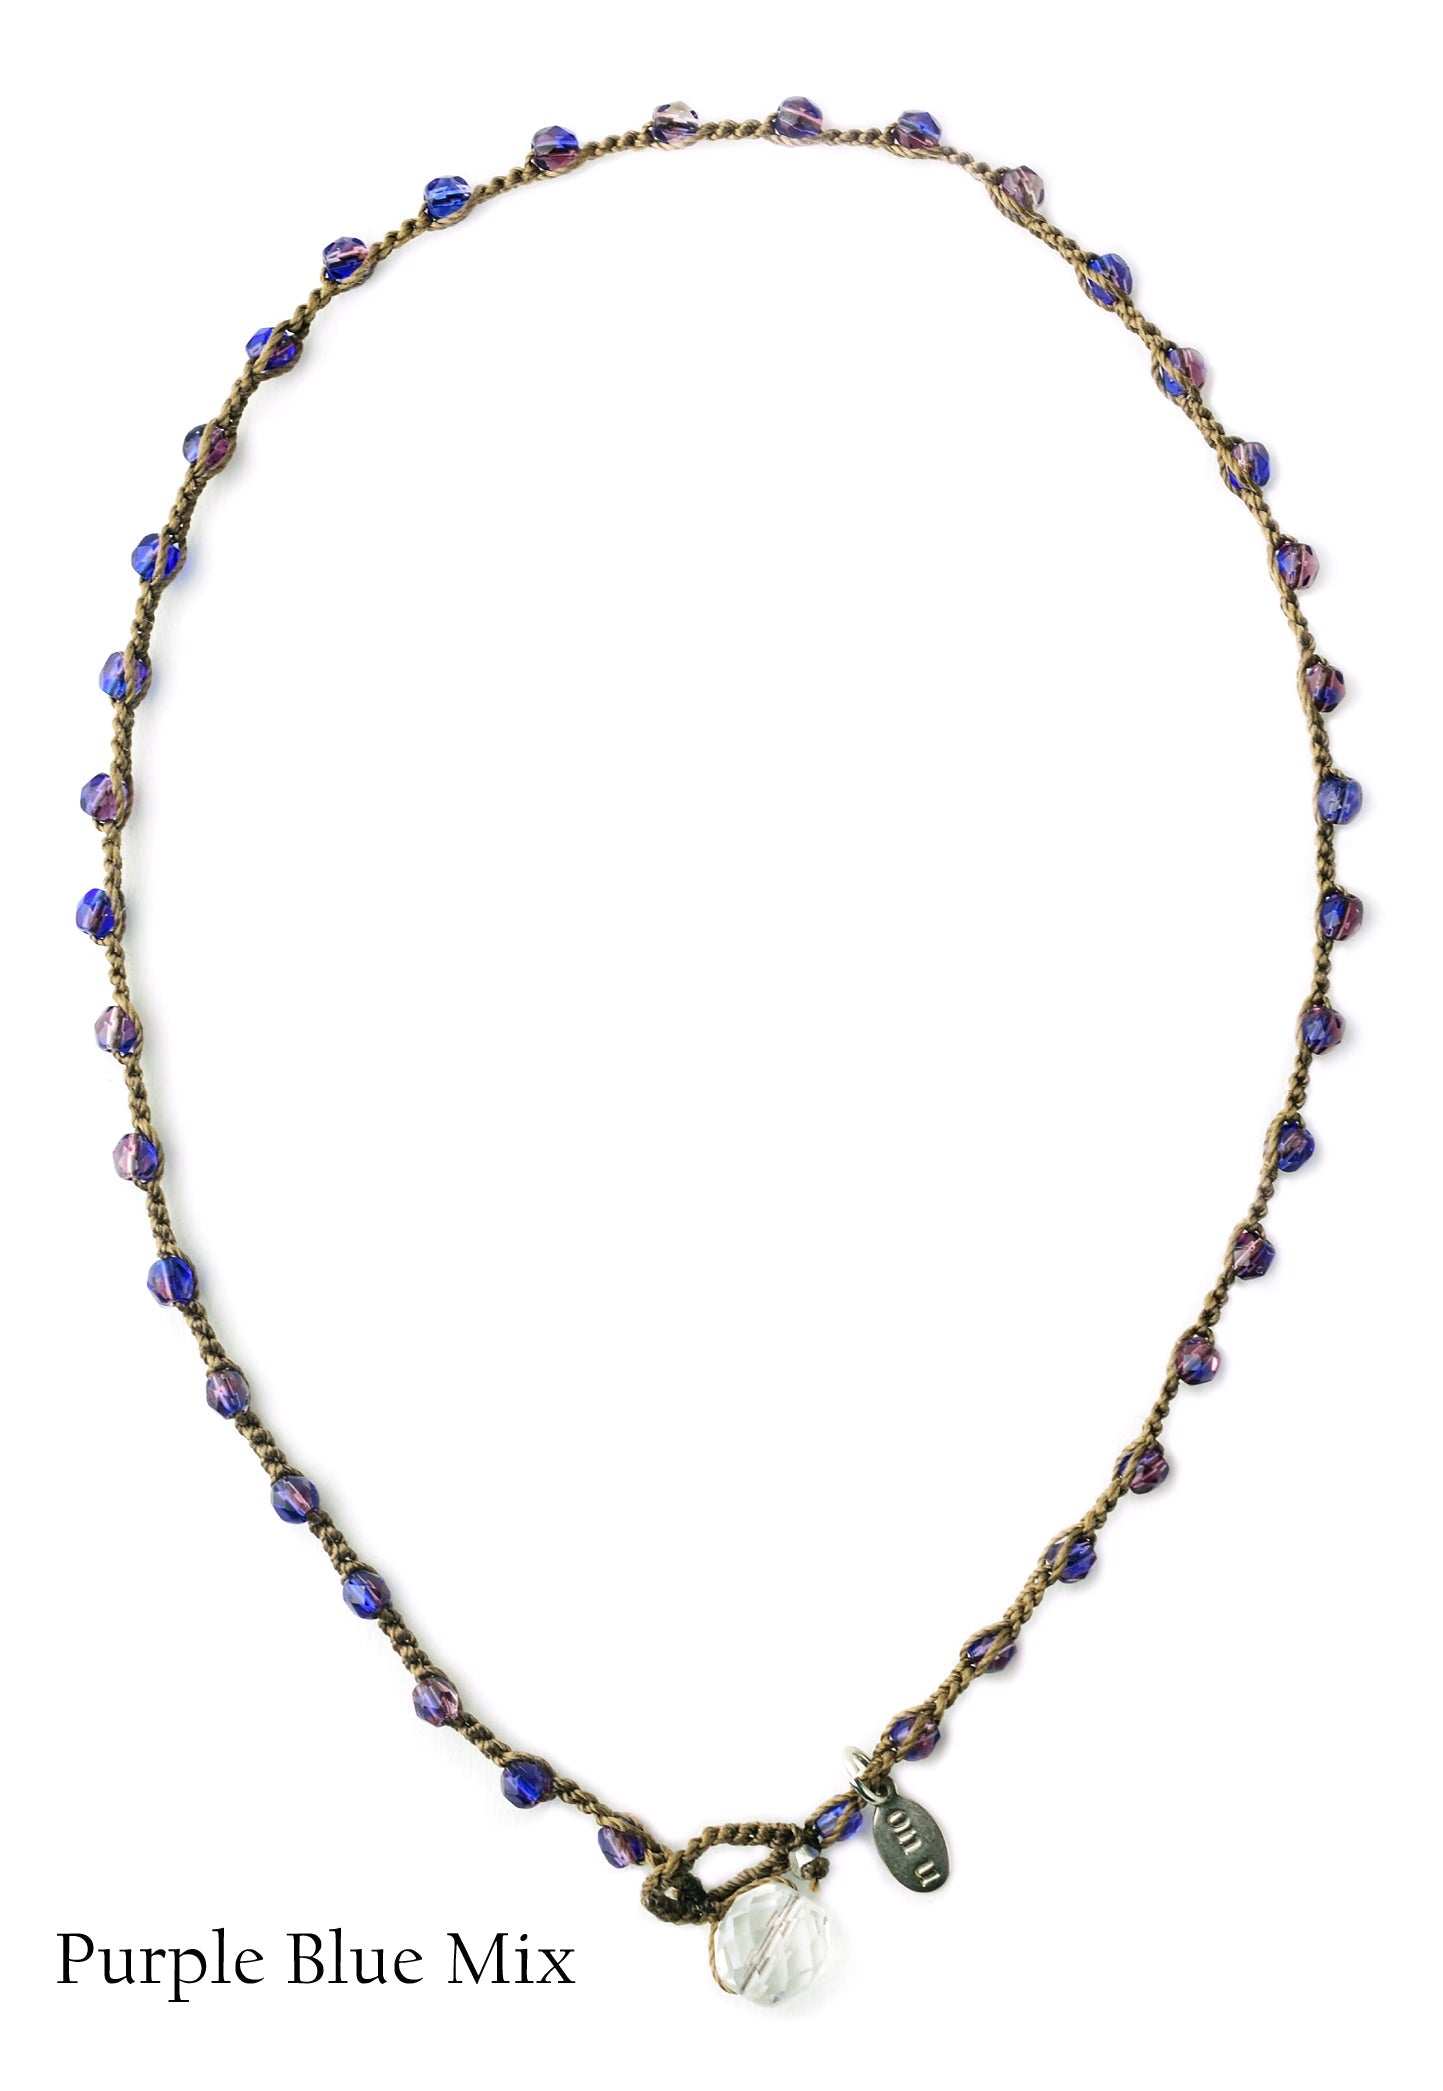 onujewelry.com - Small Bead Dot Necklace in Purple Blue Mix.  Designed, and created, by Donna Silvestri, On U Jewelry, Richmond, VA